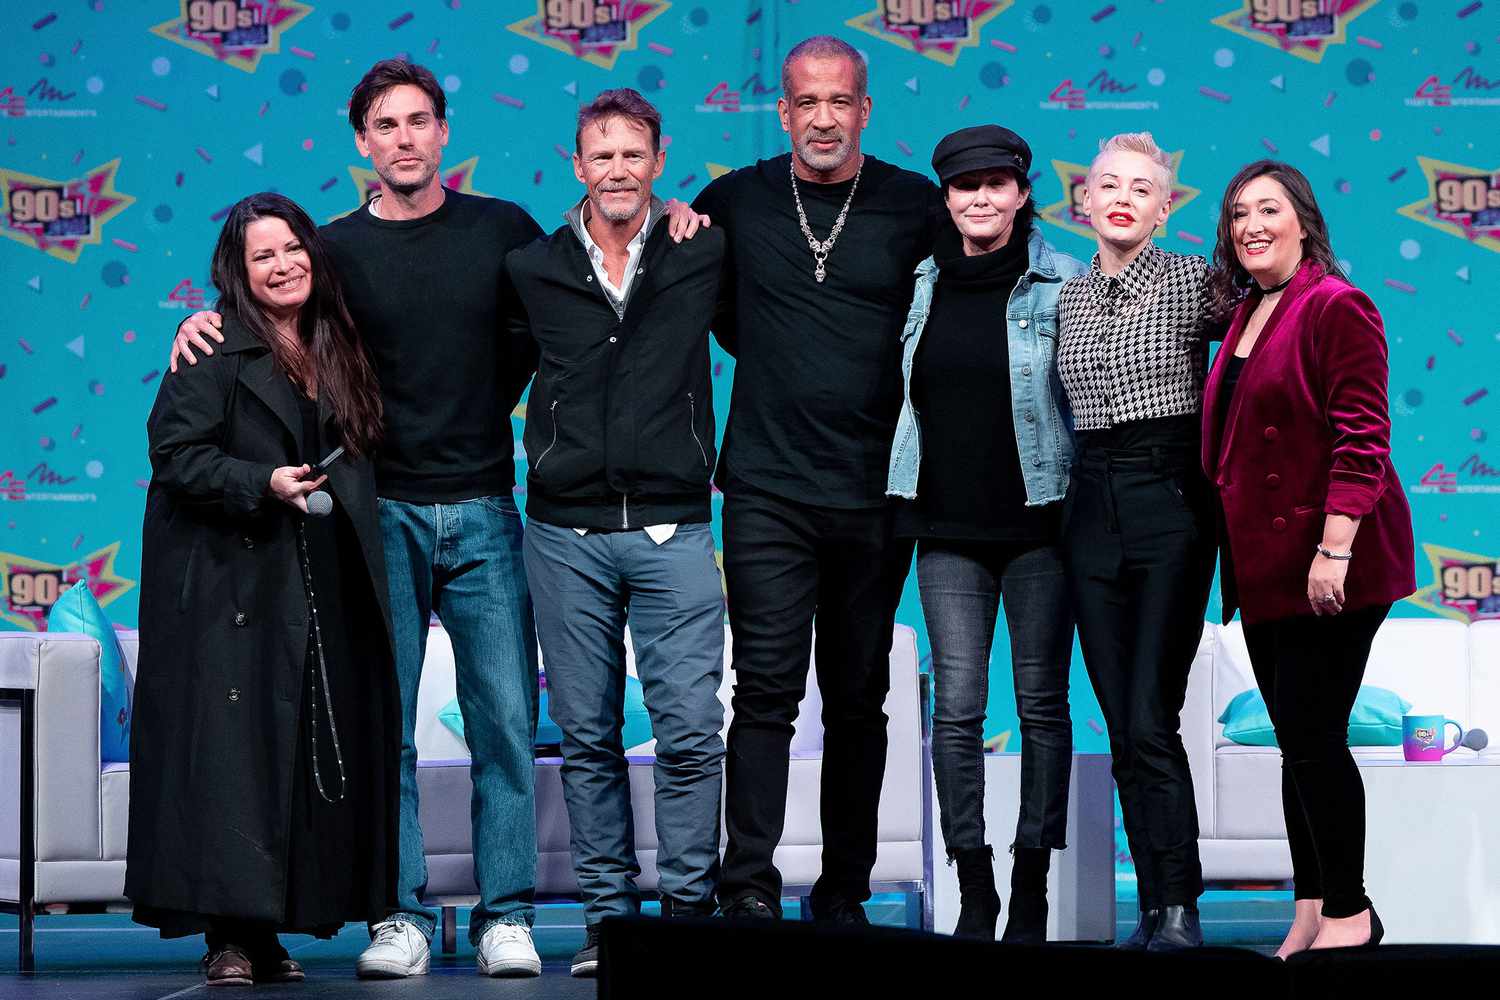 The 'Charmed' reunion at 90s Con